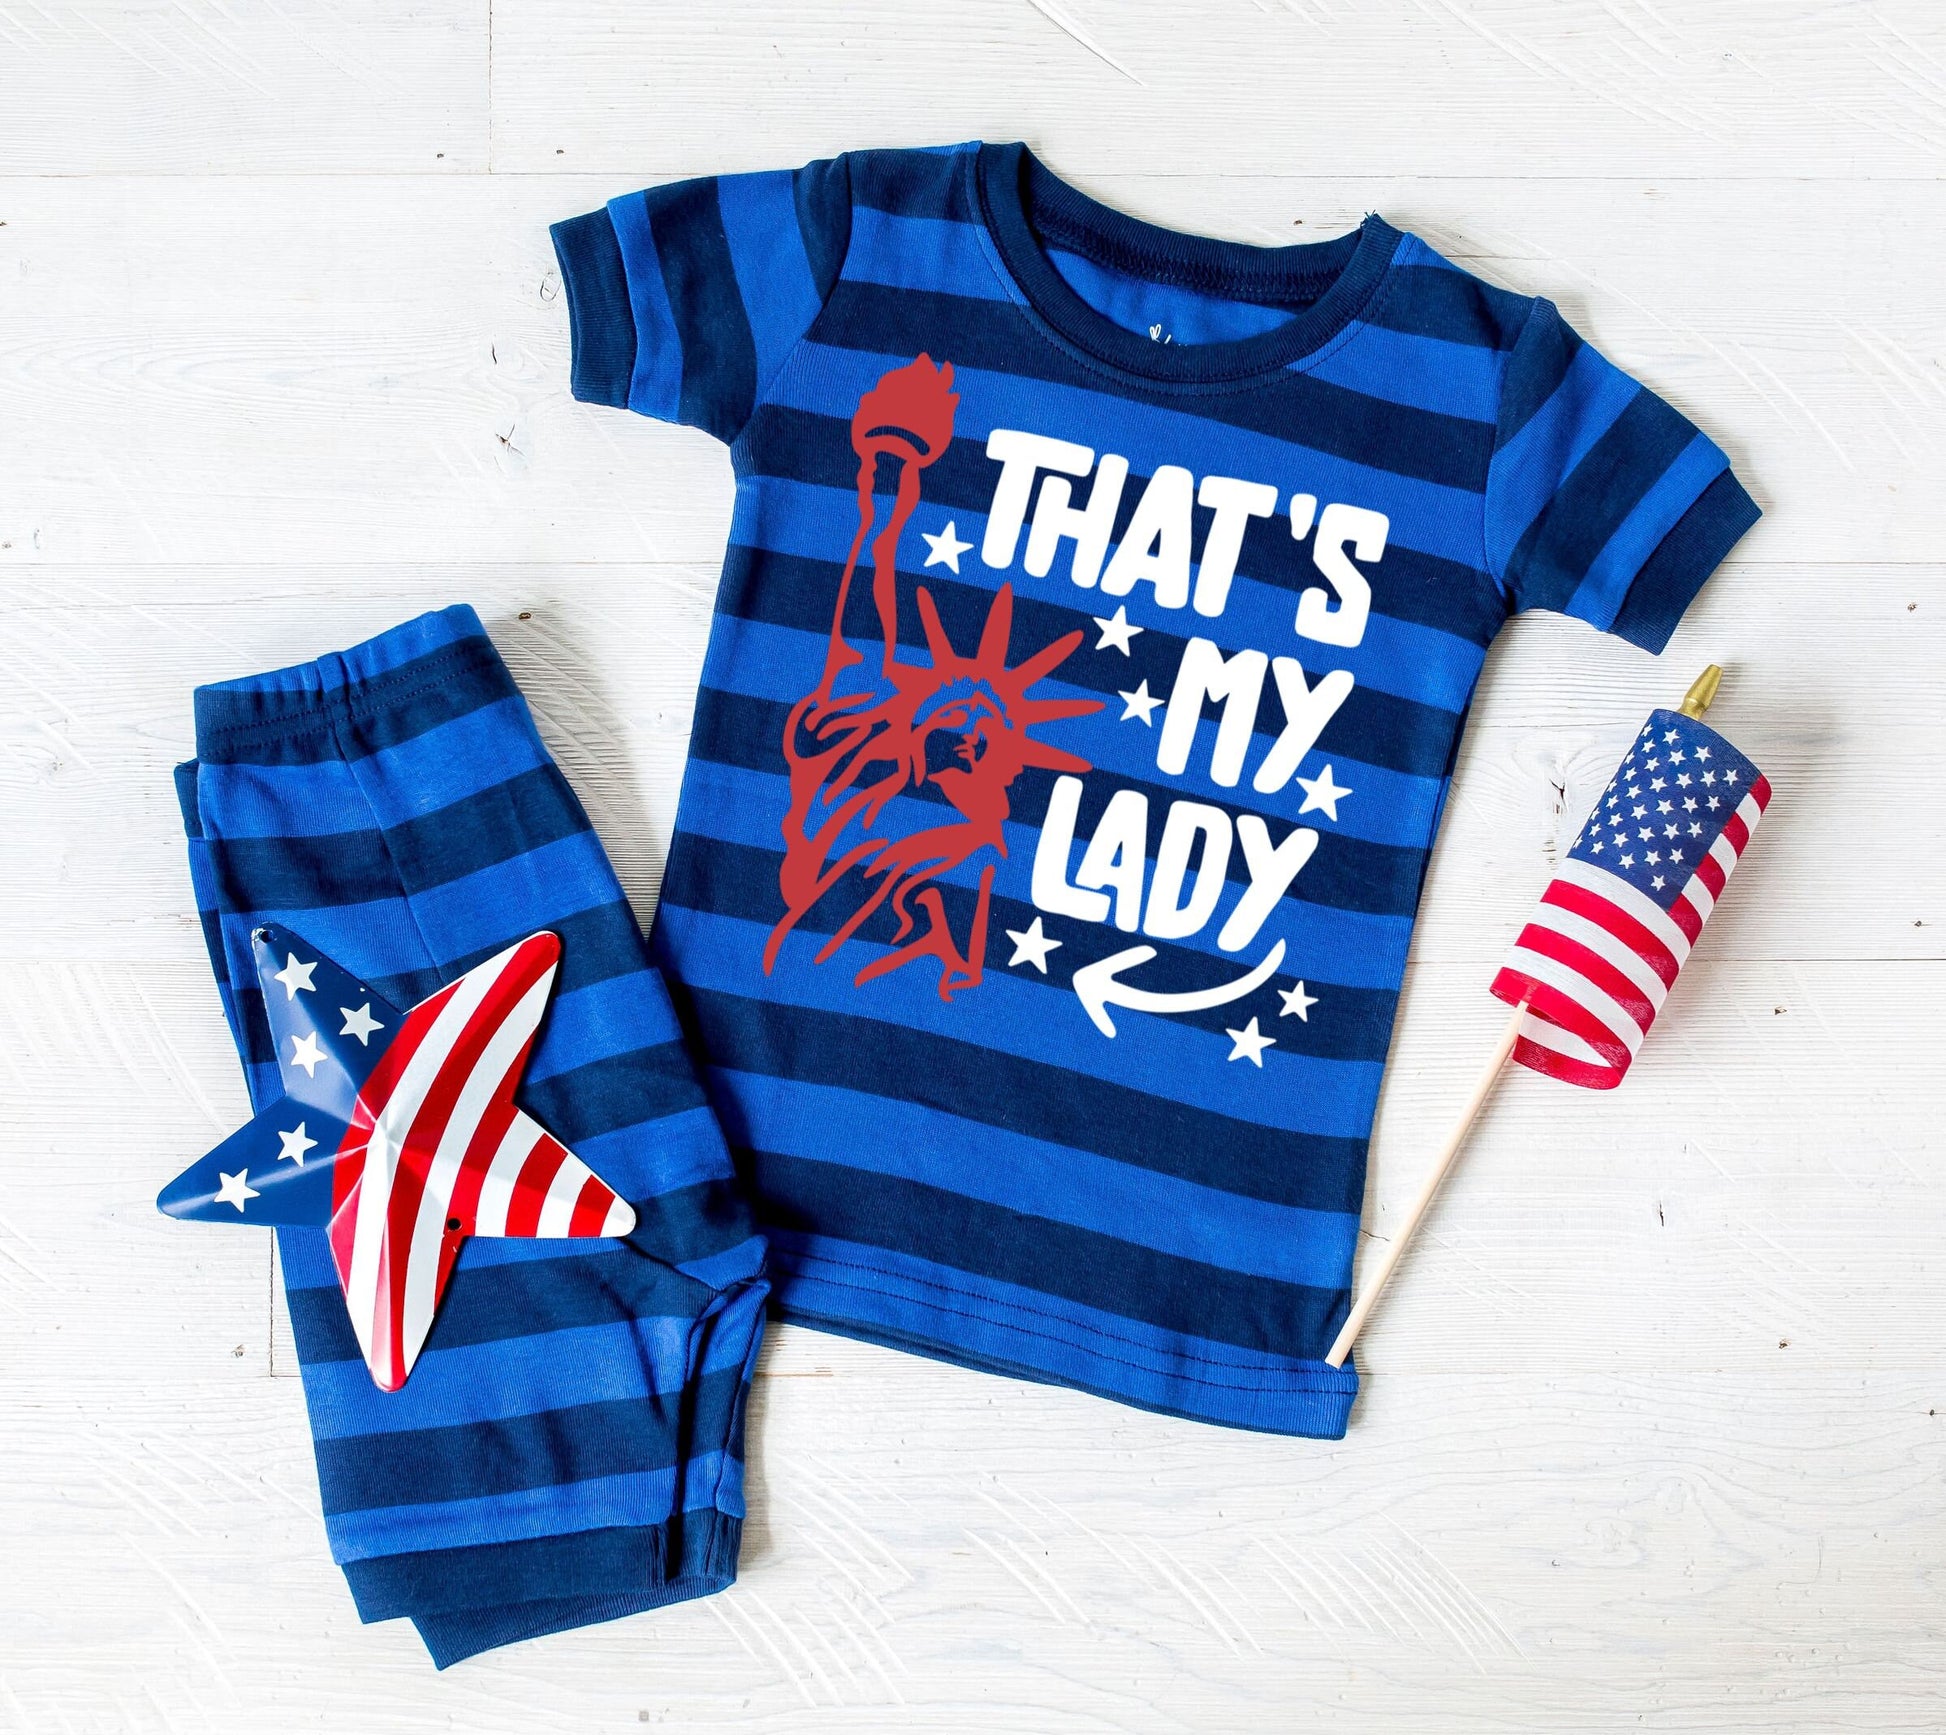 That's My Lady Statue of Liberty Striped Shorts Toddler and Kids Pajamas - Kids 4th of July Pajamas - 4th of July Toddler Pajamas Set